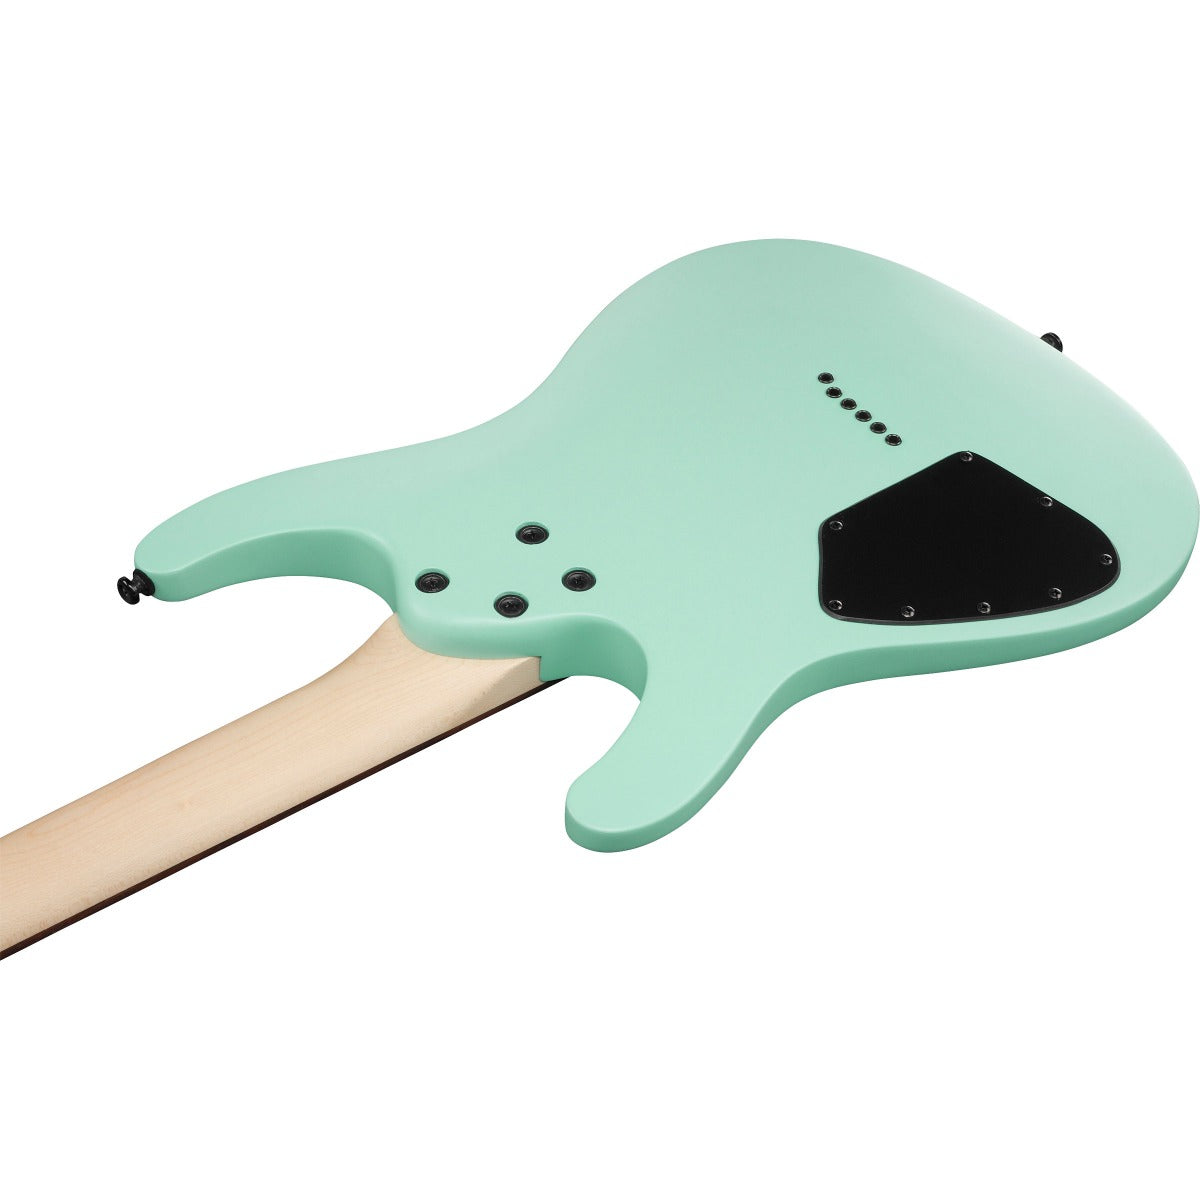 Close-up perspective view of Ibanez S561 S Standard Electric Guitar - Sea Foam Green showing back and right side of body and portion of neck